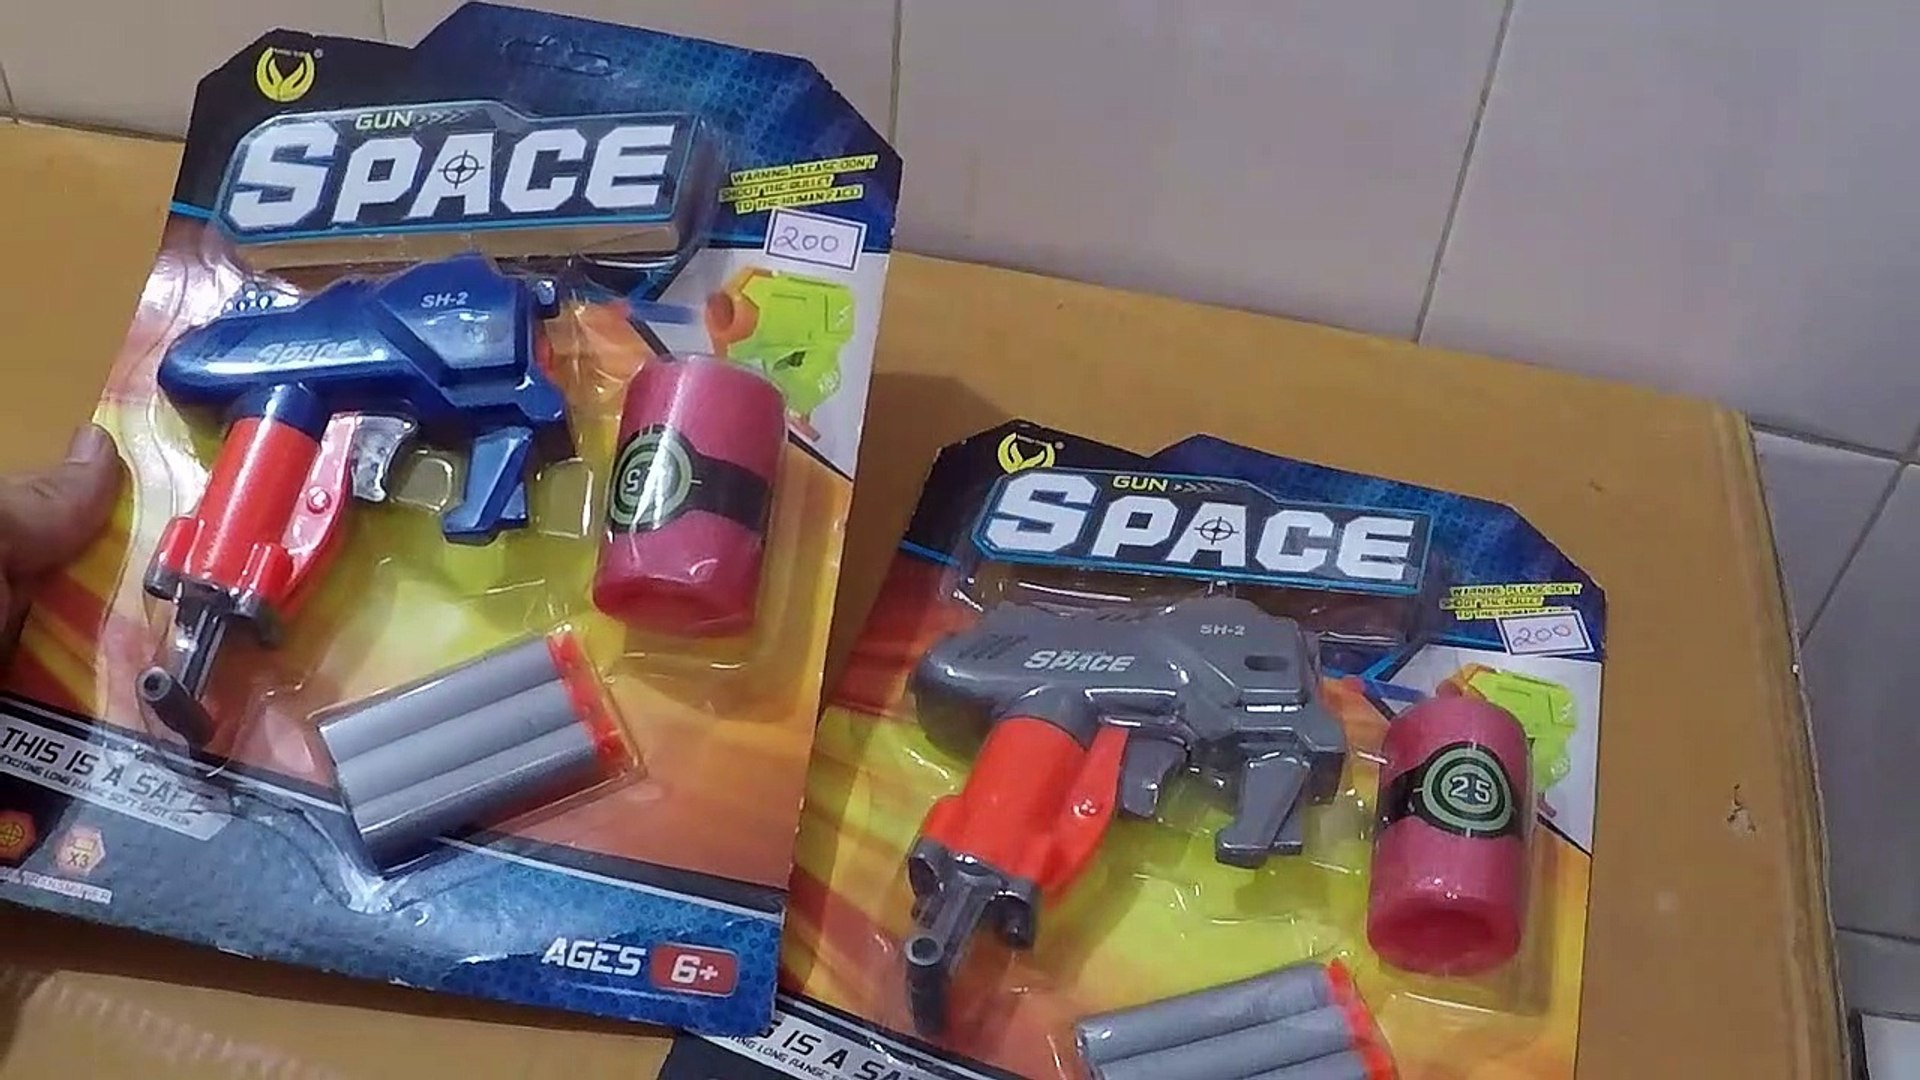 Unboxing and Review of SPACE sh-2 soft bullet toy gun for kids gift - video  Dailymotion